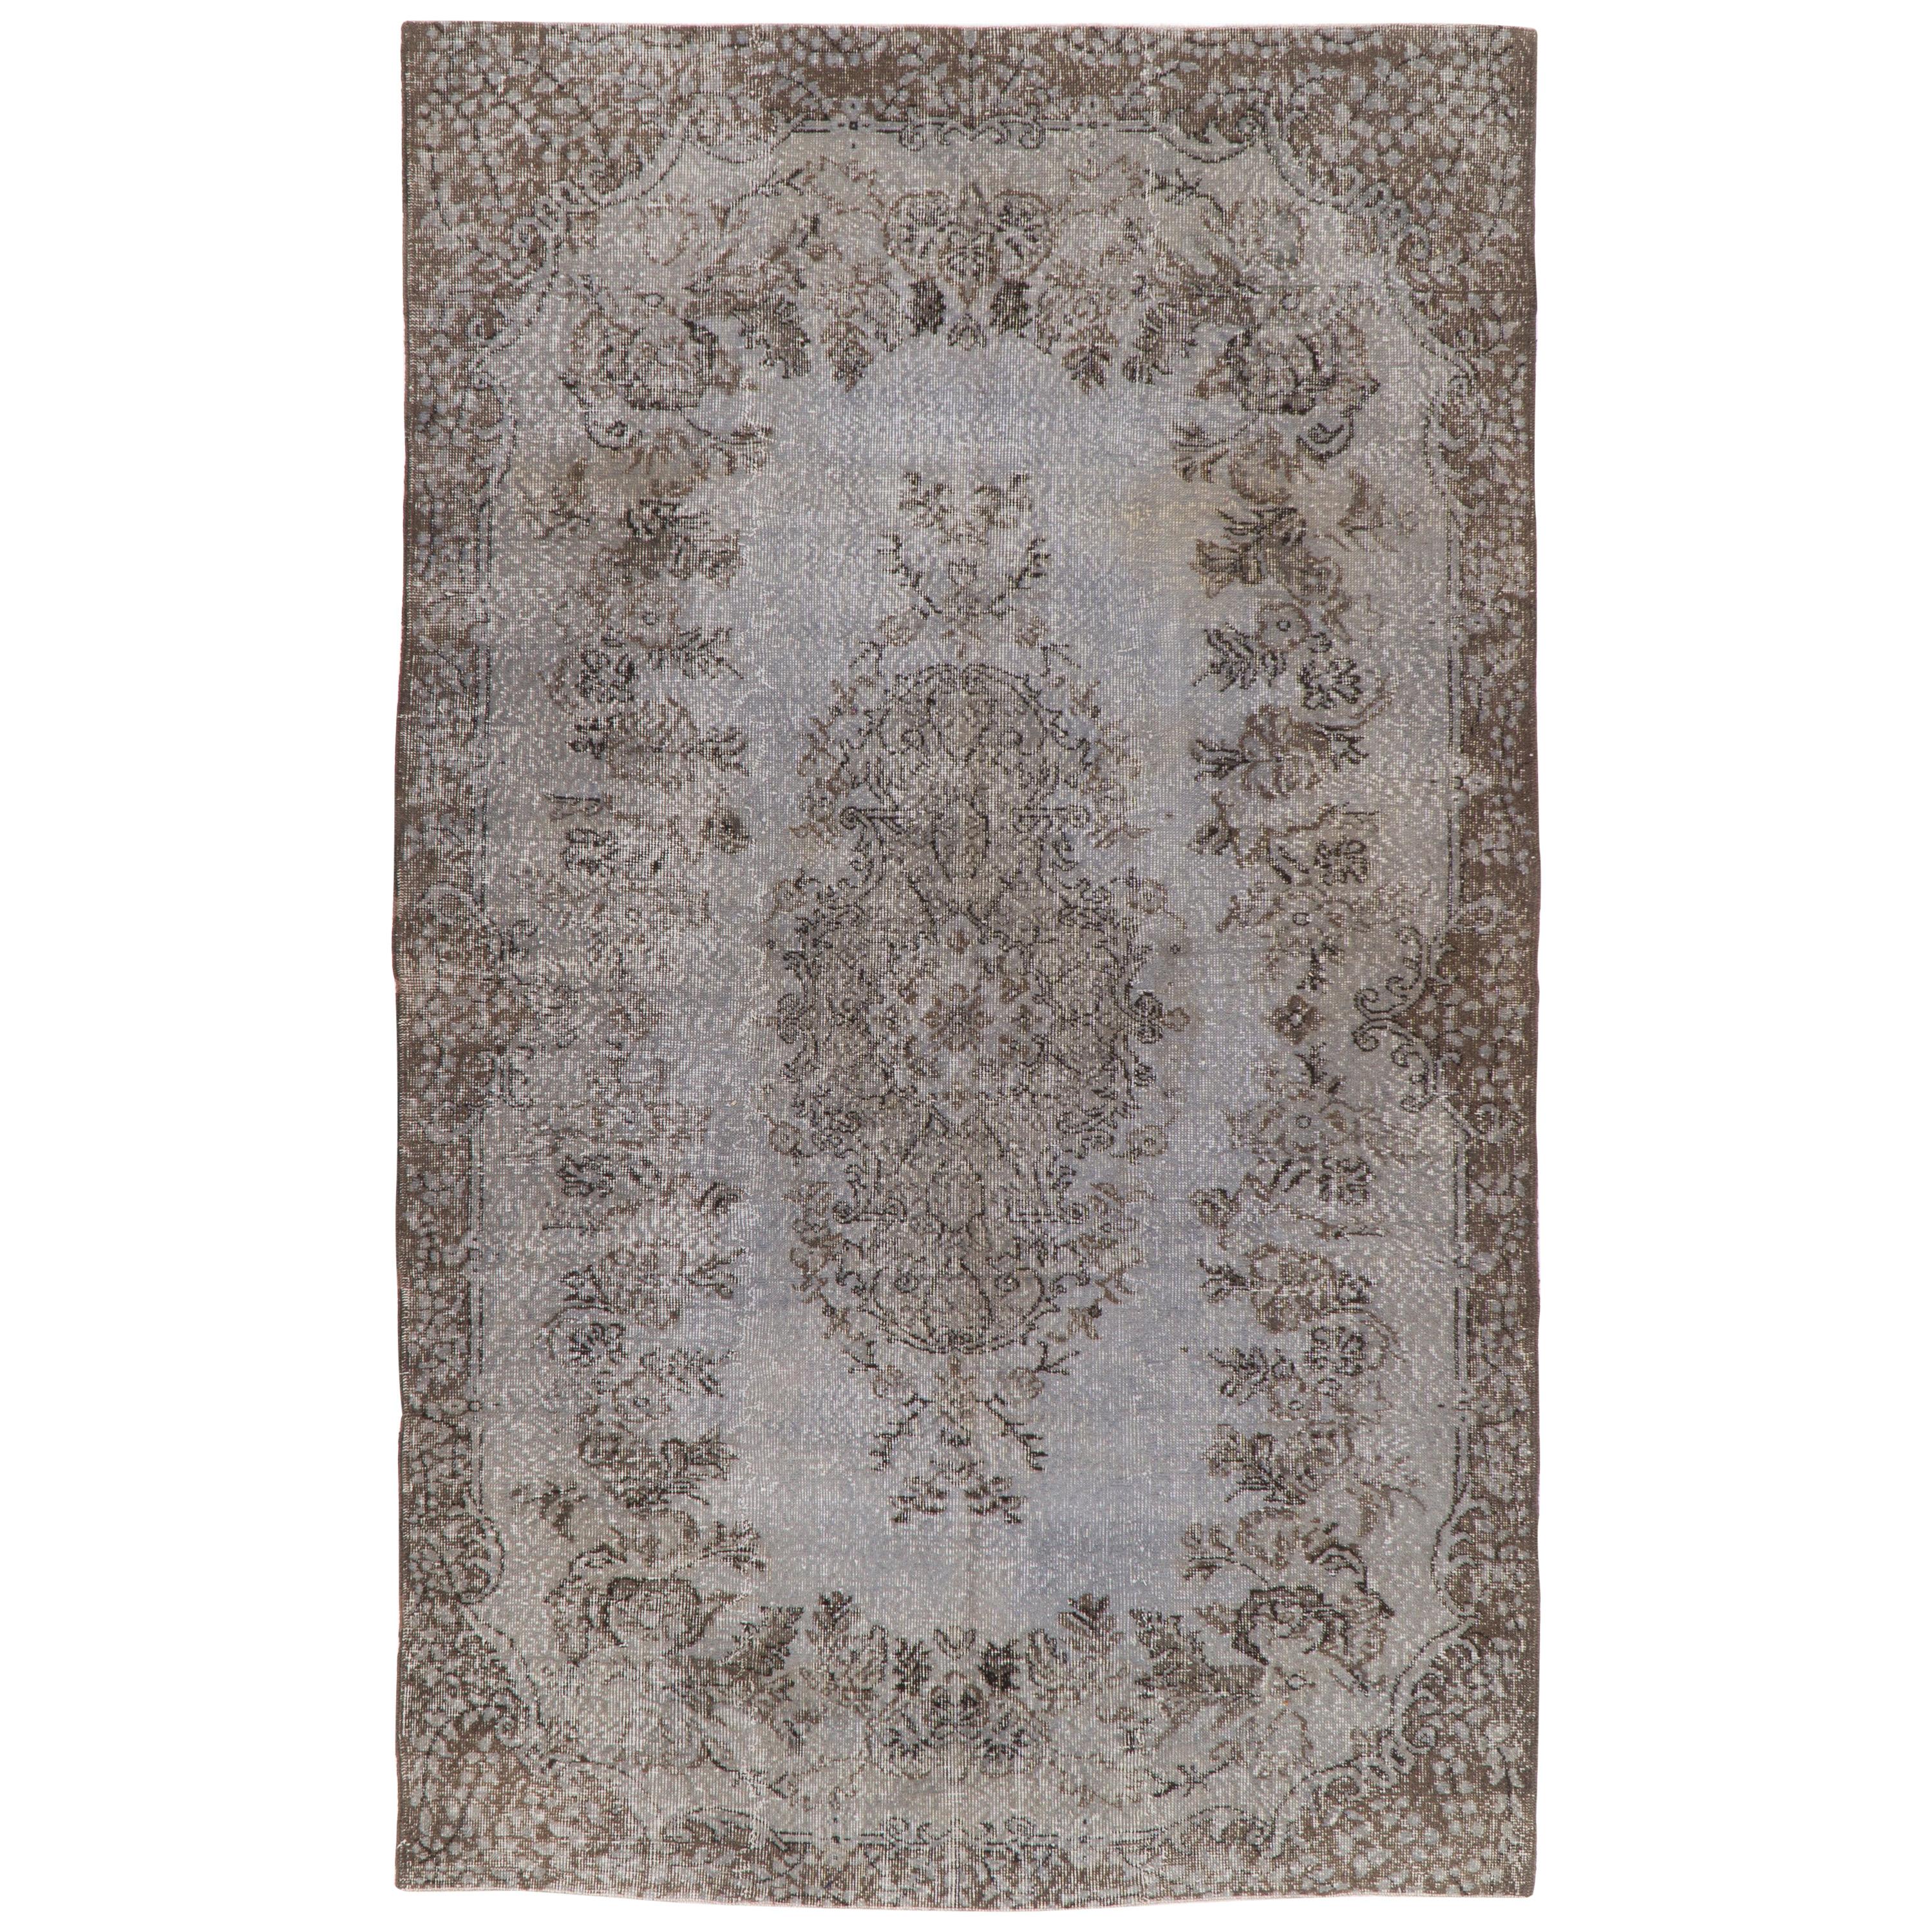 6x10 Ft Vintage Handmade Anatolian Area Rug Re-Dyed in Gray Color